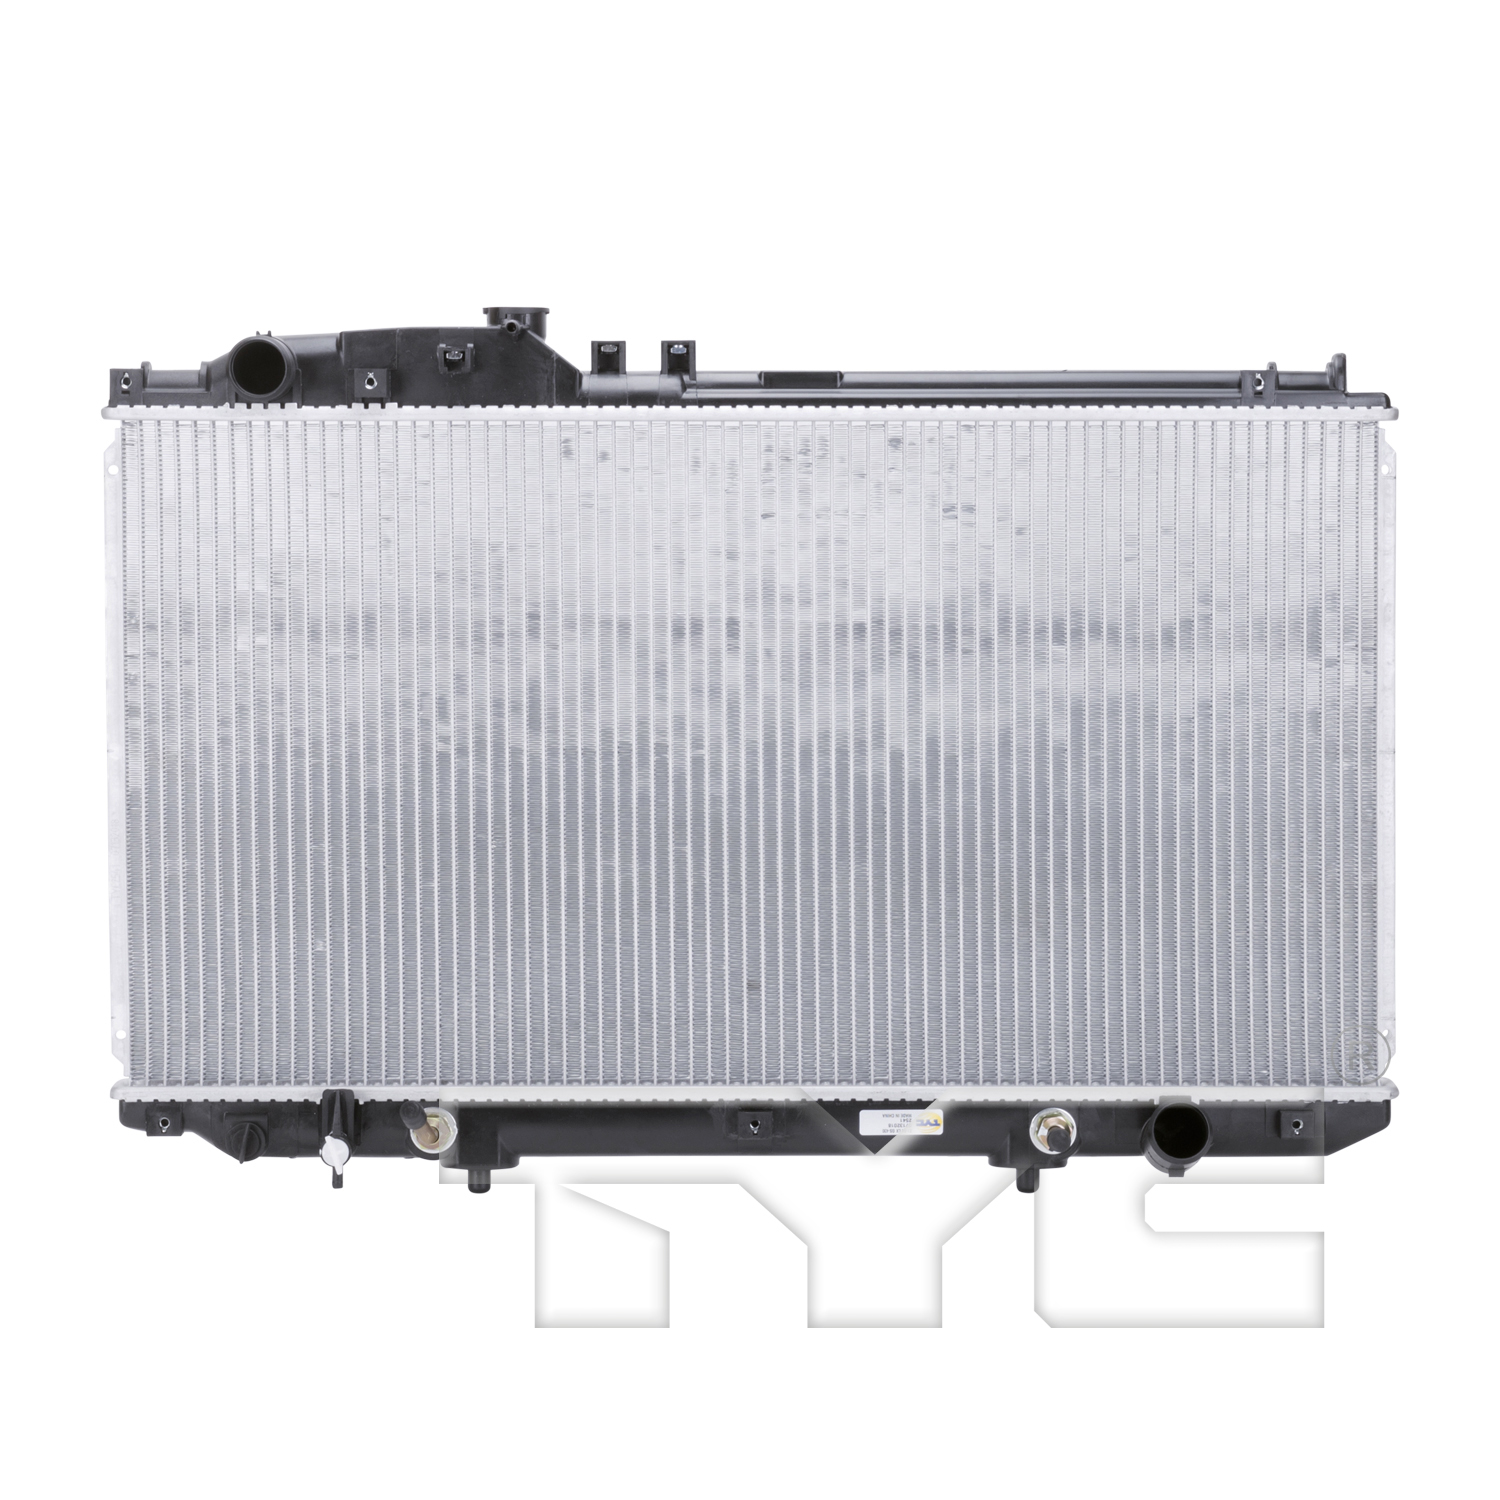 Aftermarket RADIATORS for LEXUS - GS430, GS430,01-05,Radiator assembly